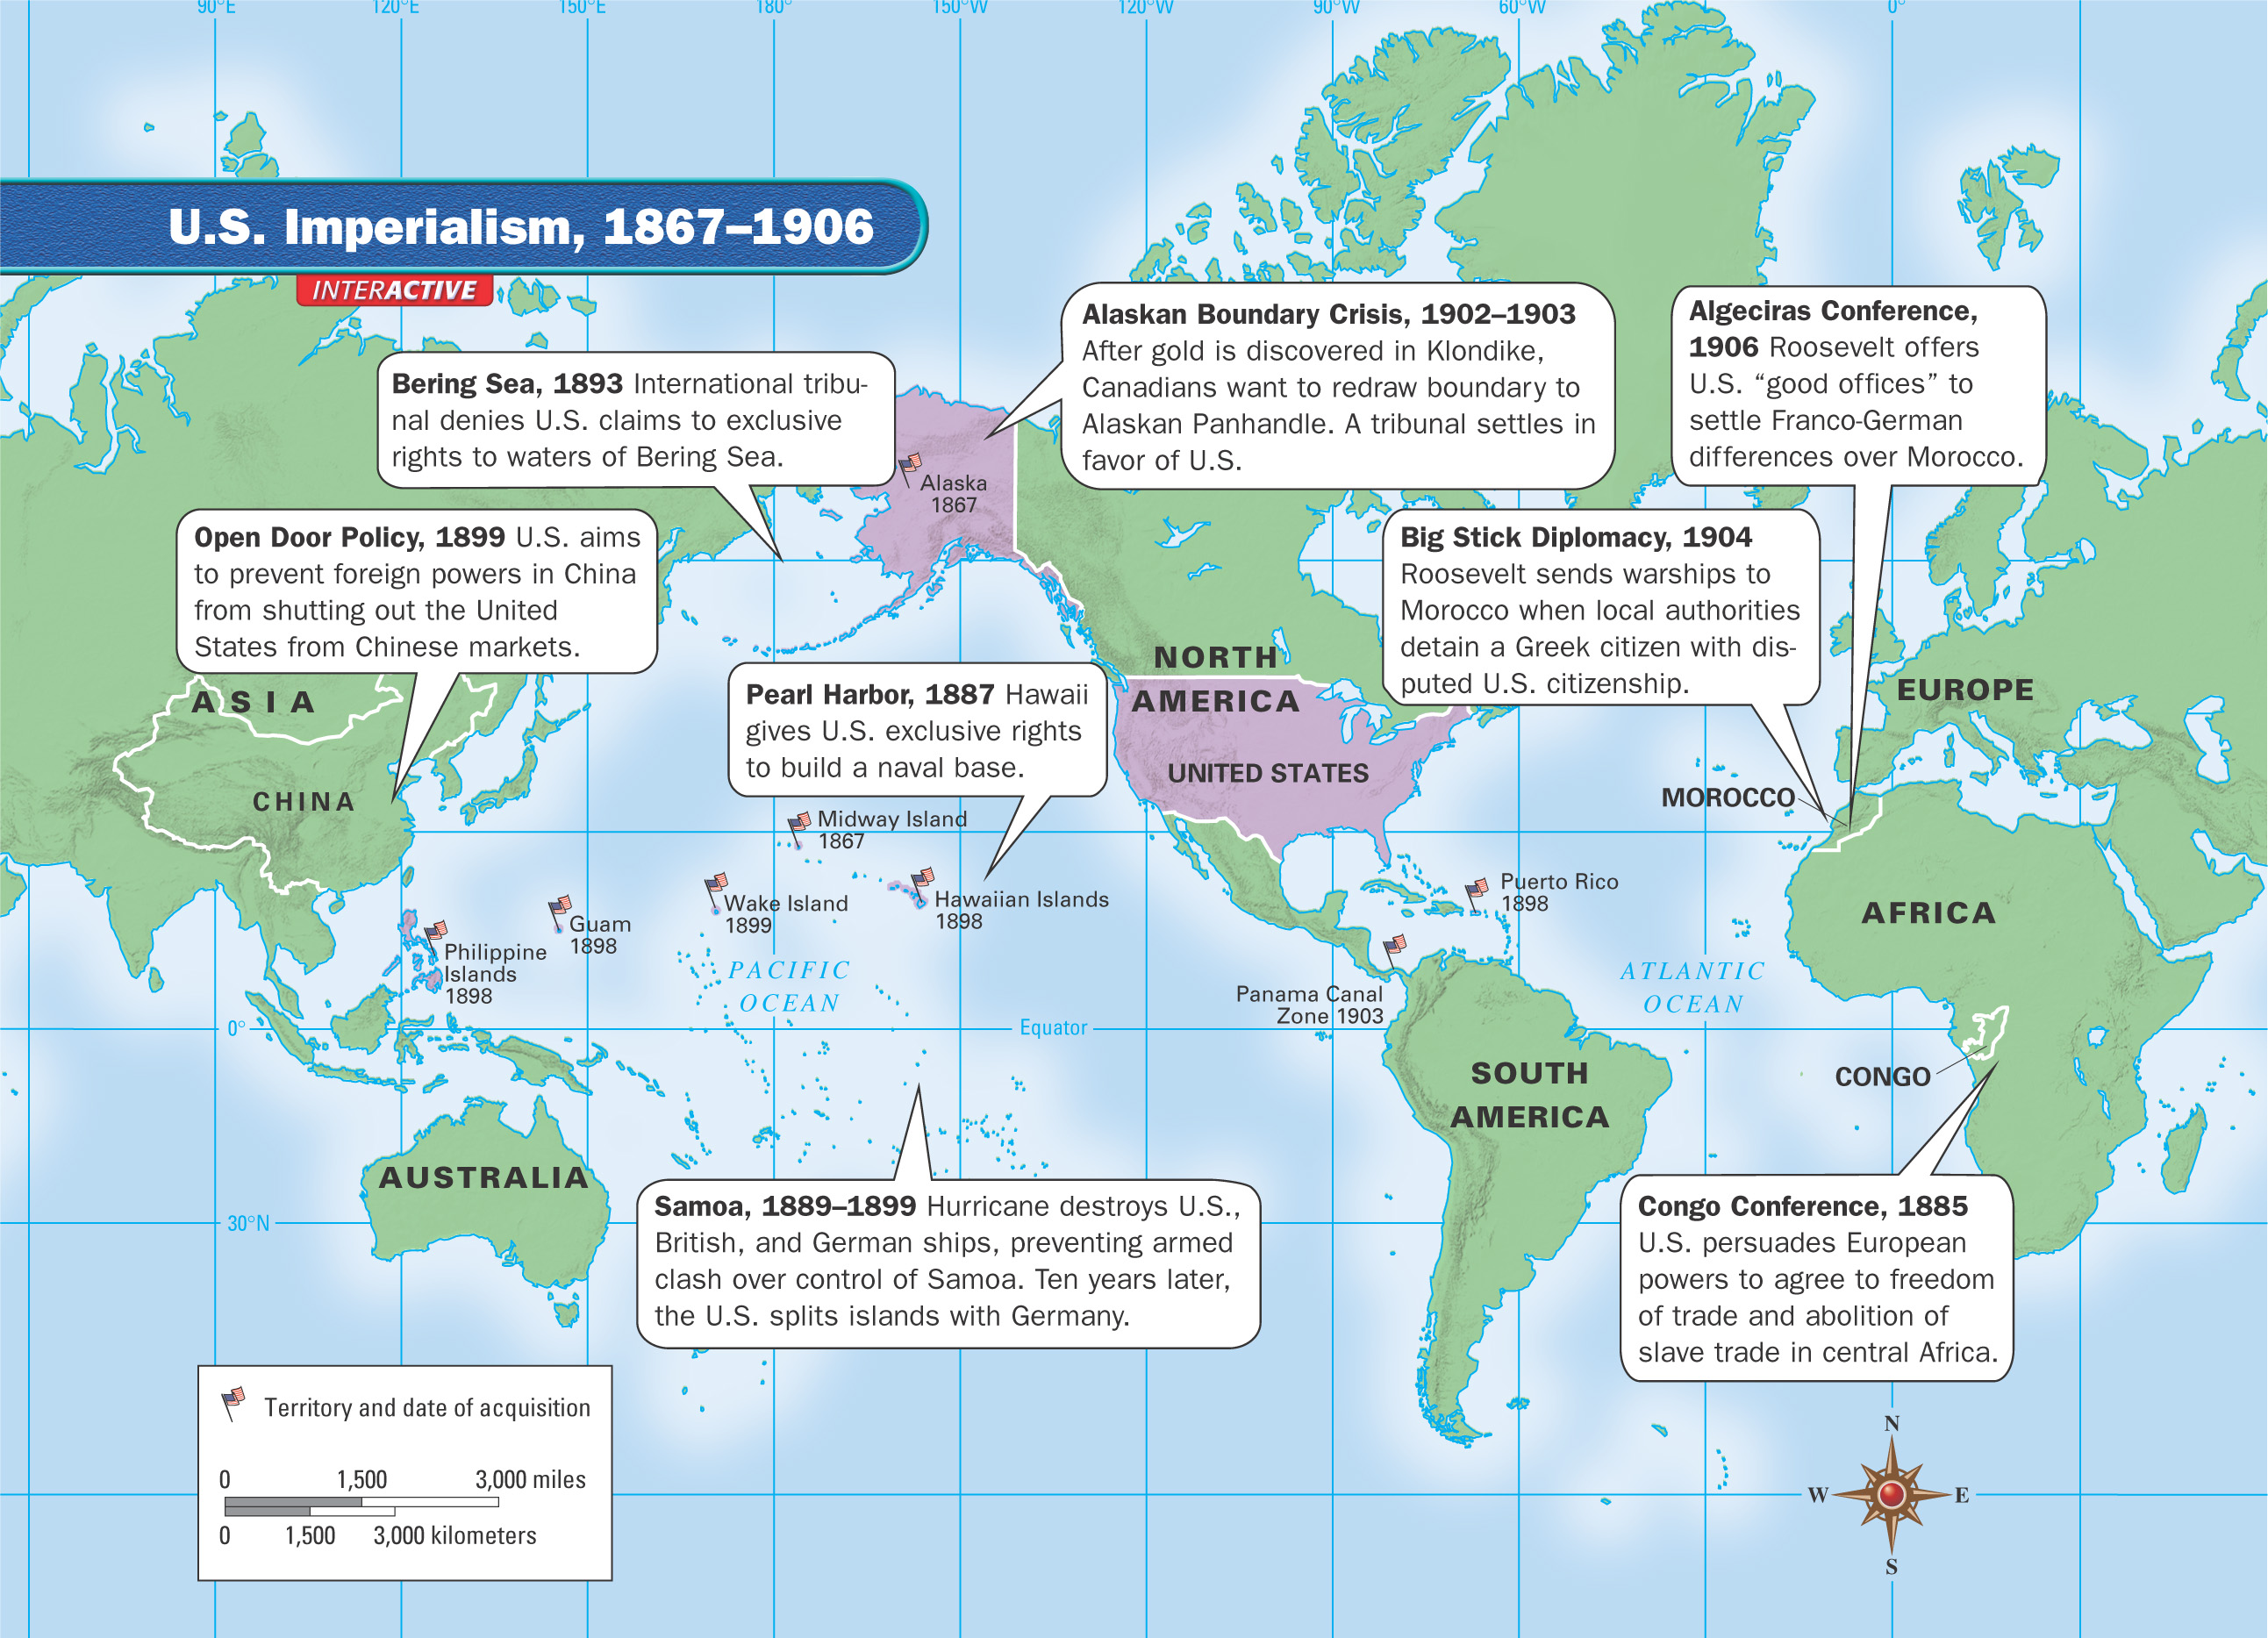 A world map shows 8 areas of U.S. Imperialism, 1867 - 1906